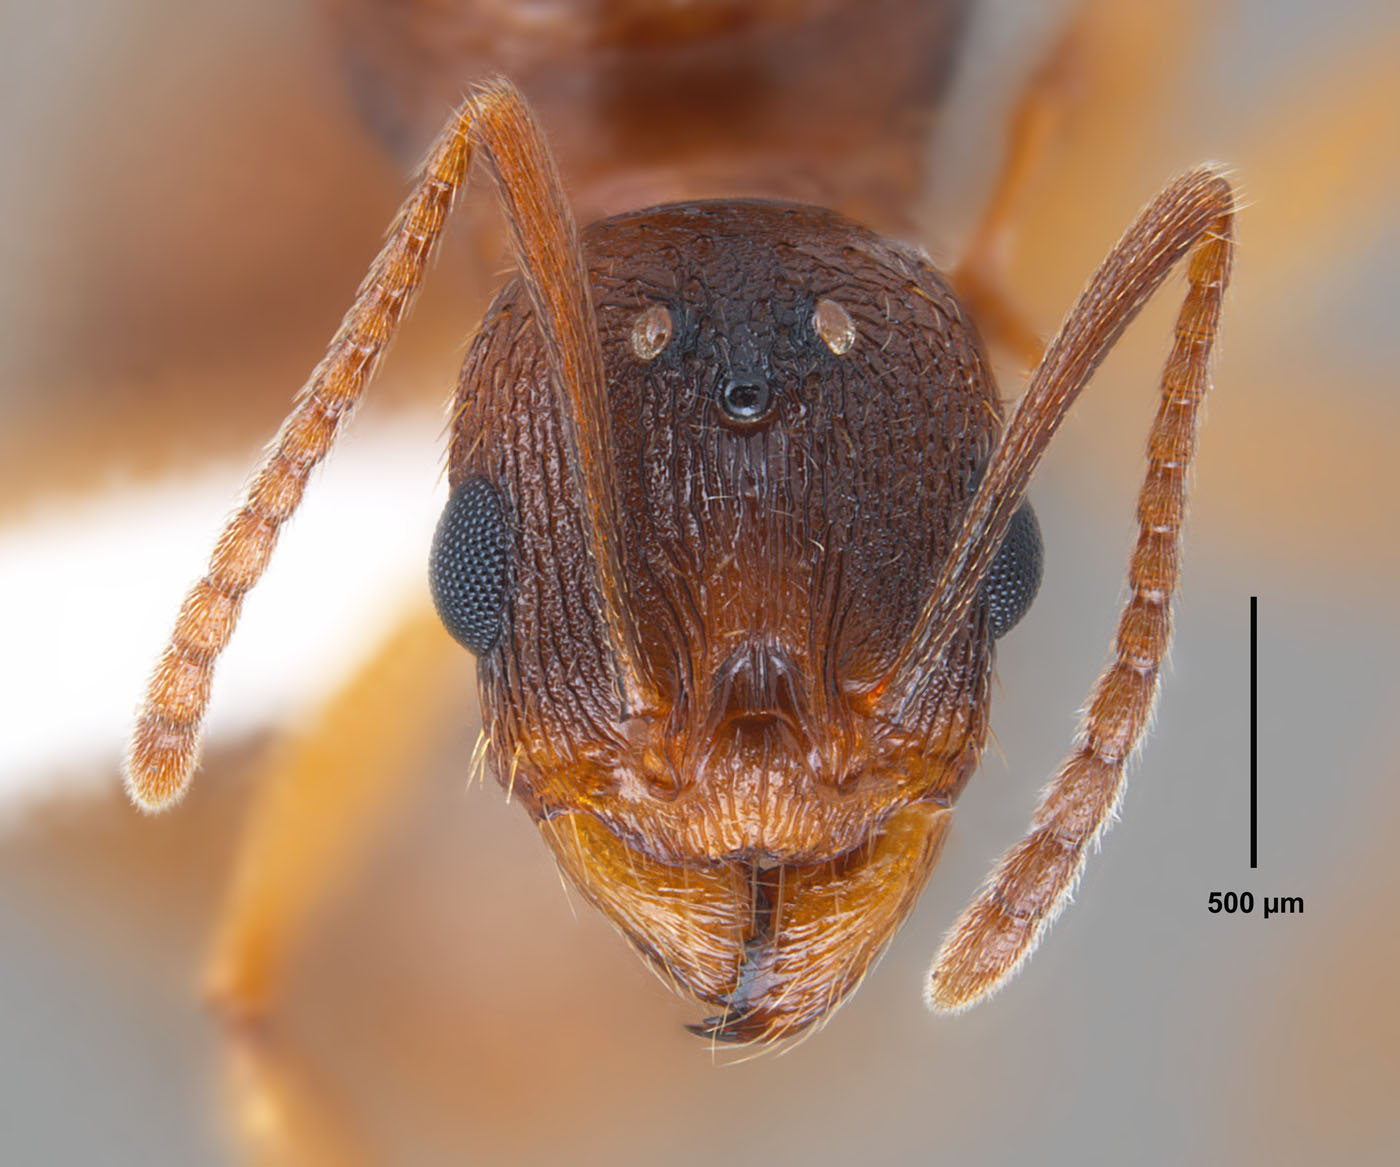 Aphaenogaster carolinensis full face view of alate queen